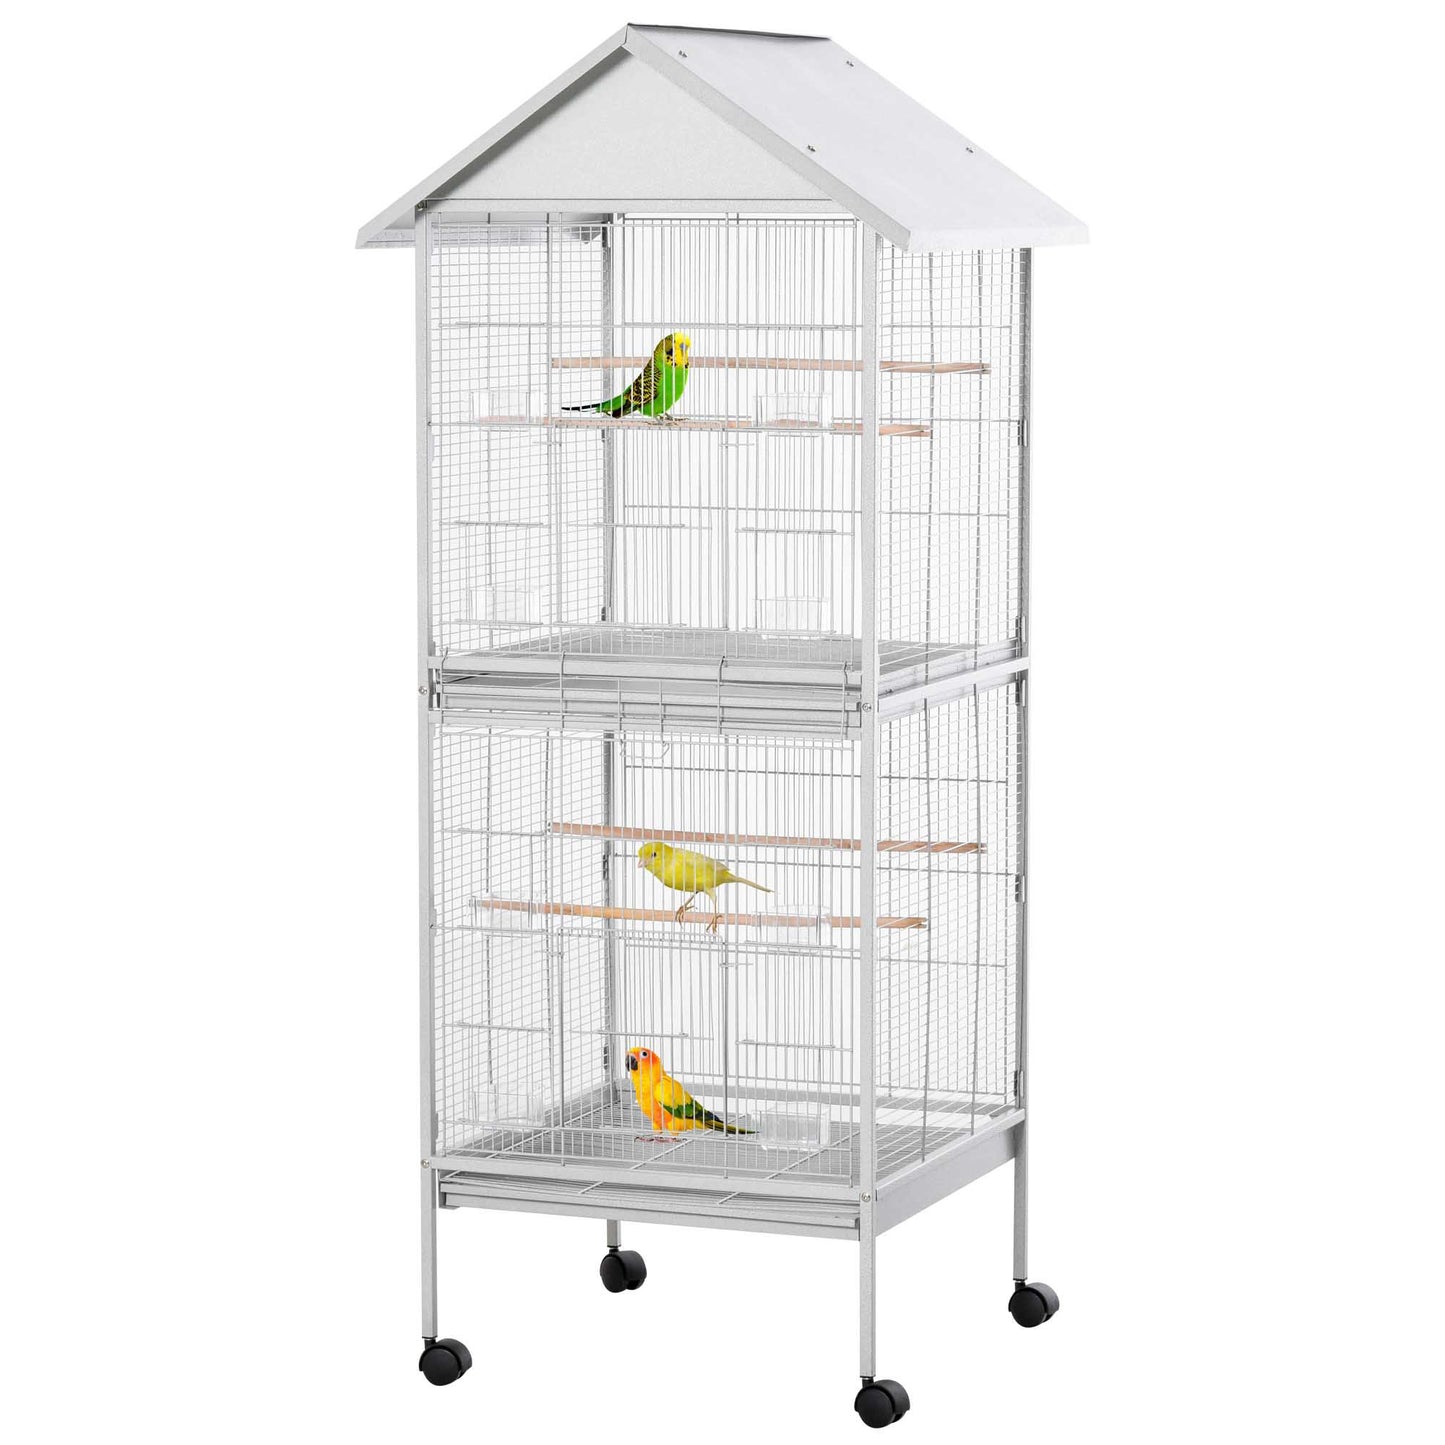 PawHut 170cm Metal Bird Cage Parrot Cage Mobile Feeder with Rolling Stand Perches Food Containers Doors Wheels White